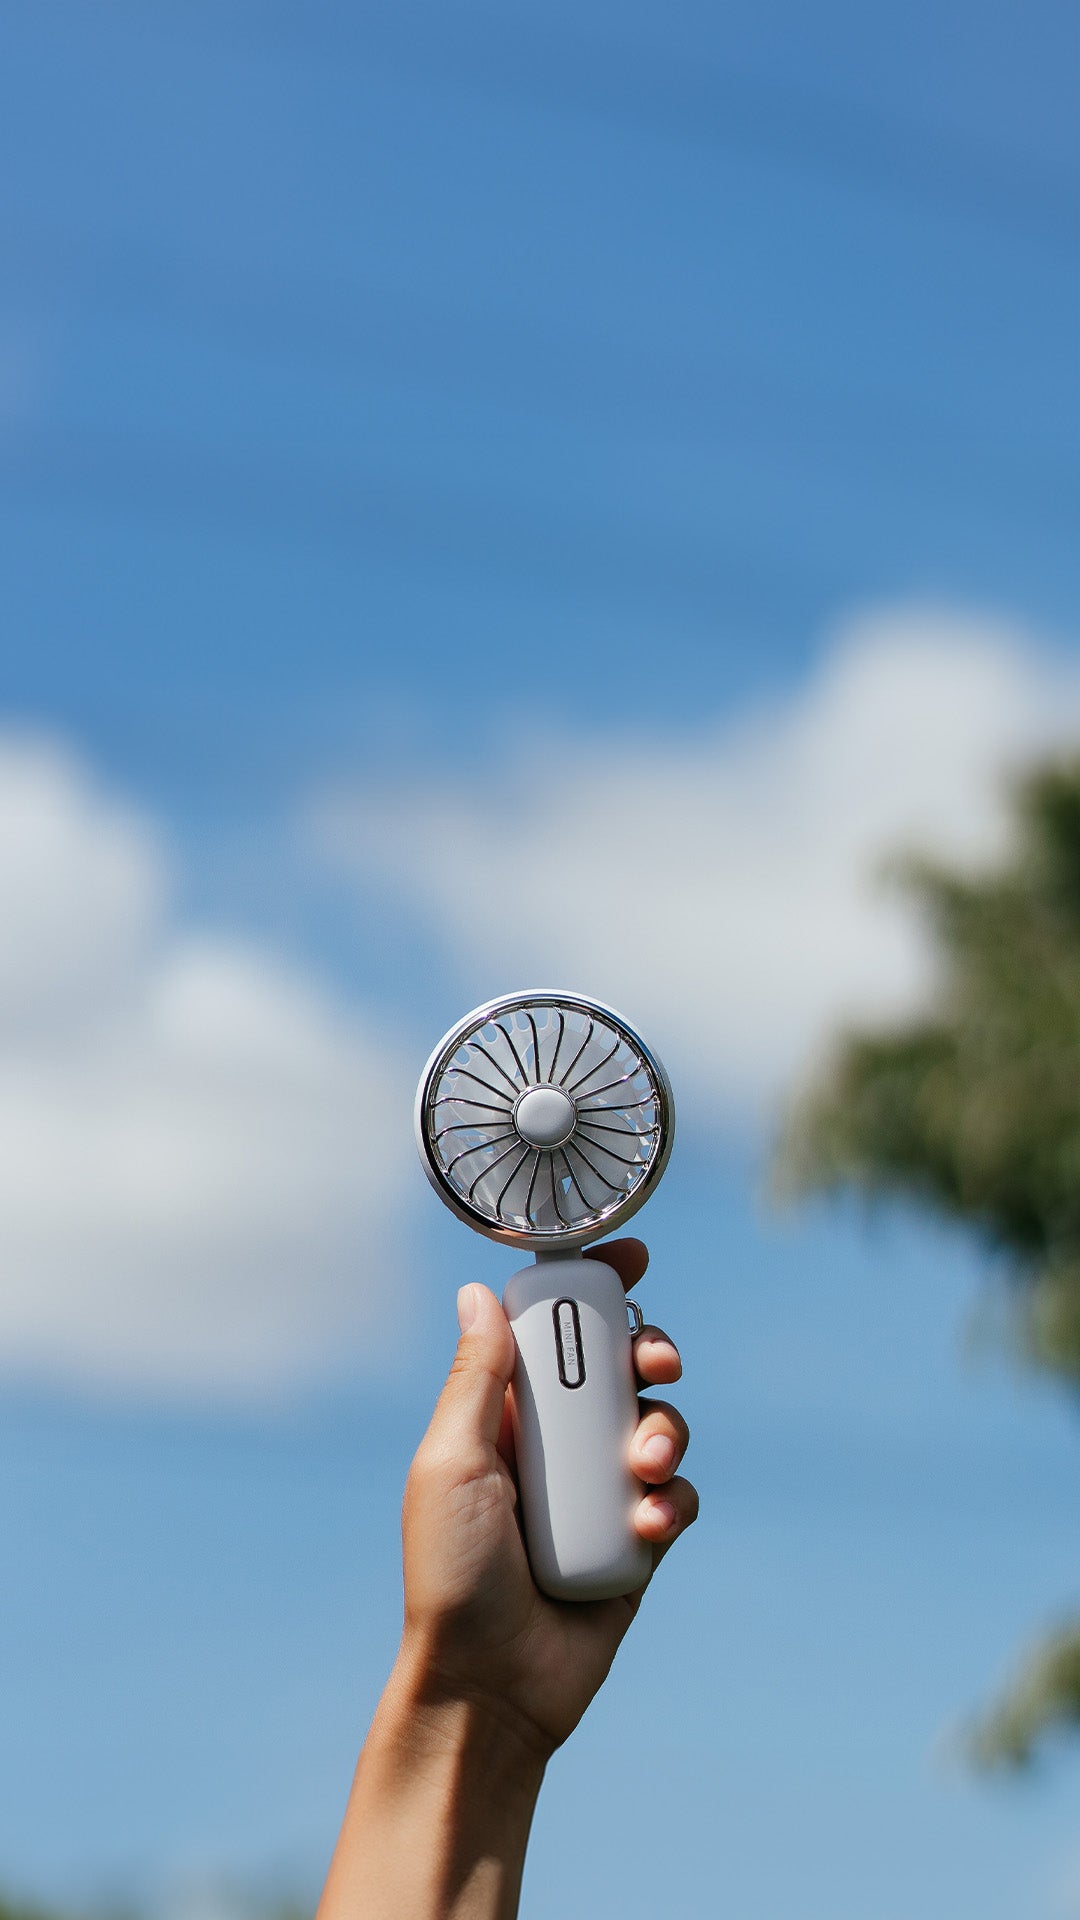 Individual showcasing a portable rechargeable handheld fan